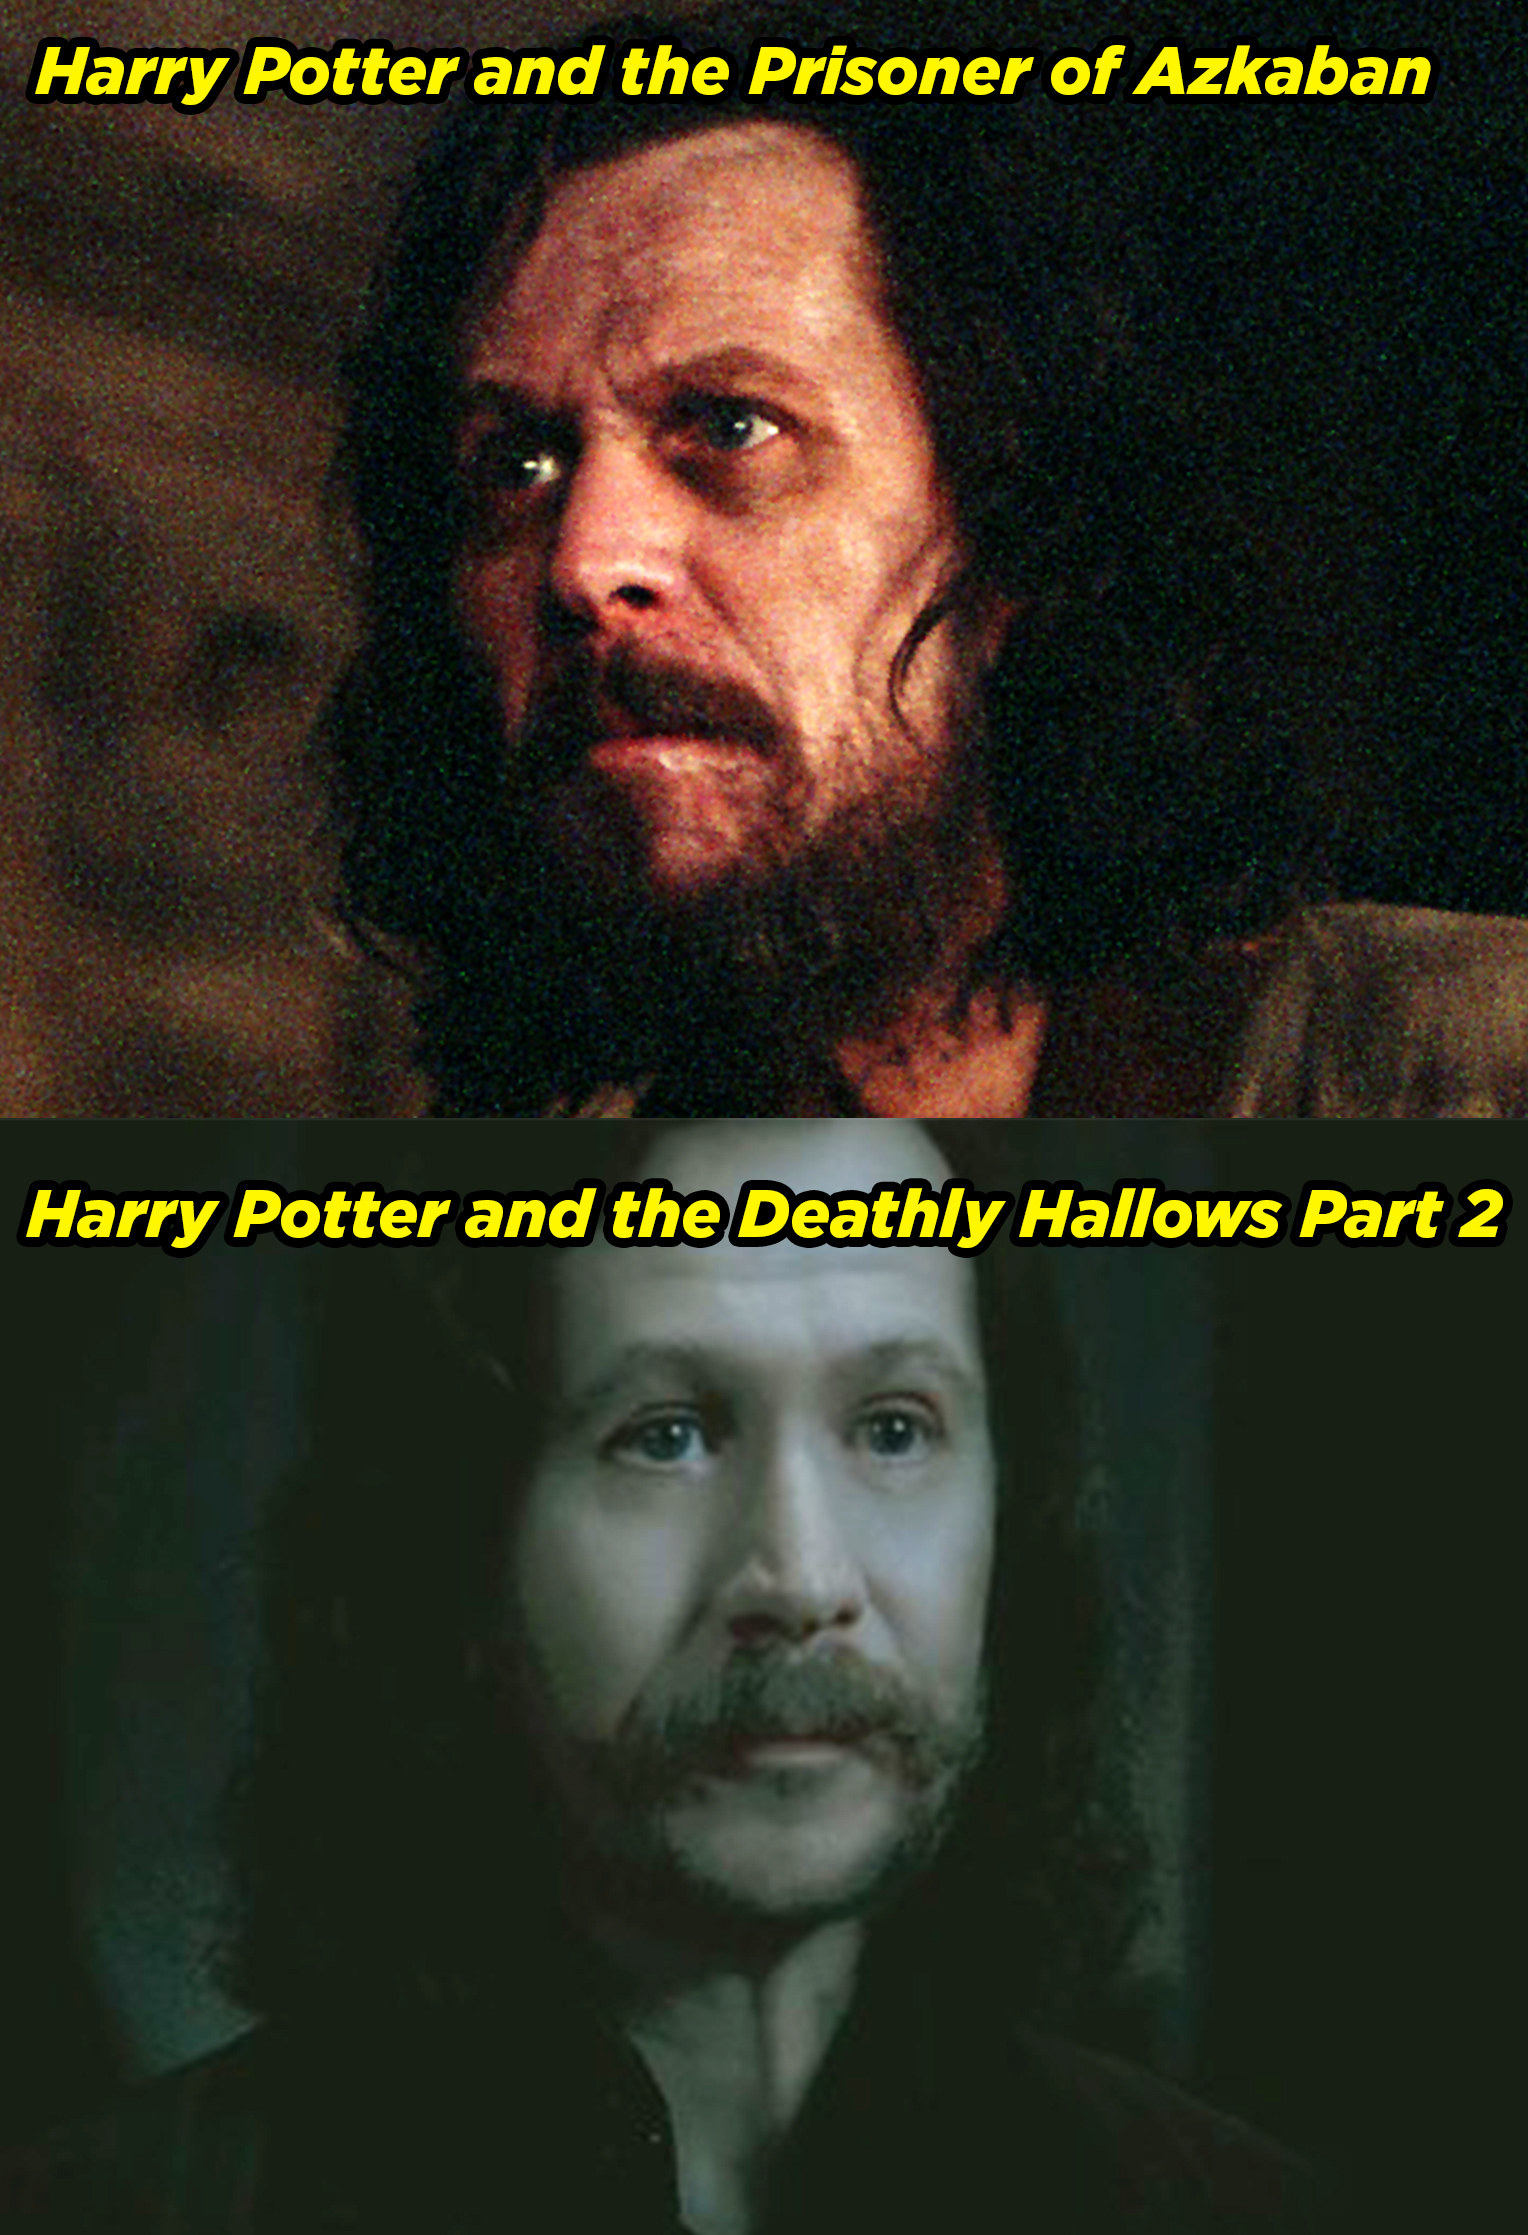 Gary Oldman in Prisoner of Azkaban and Deathly Hallows Part 2